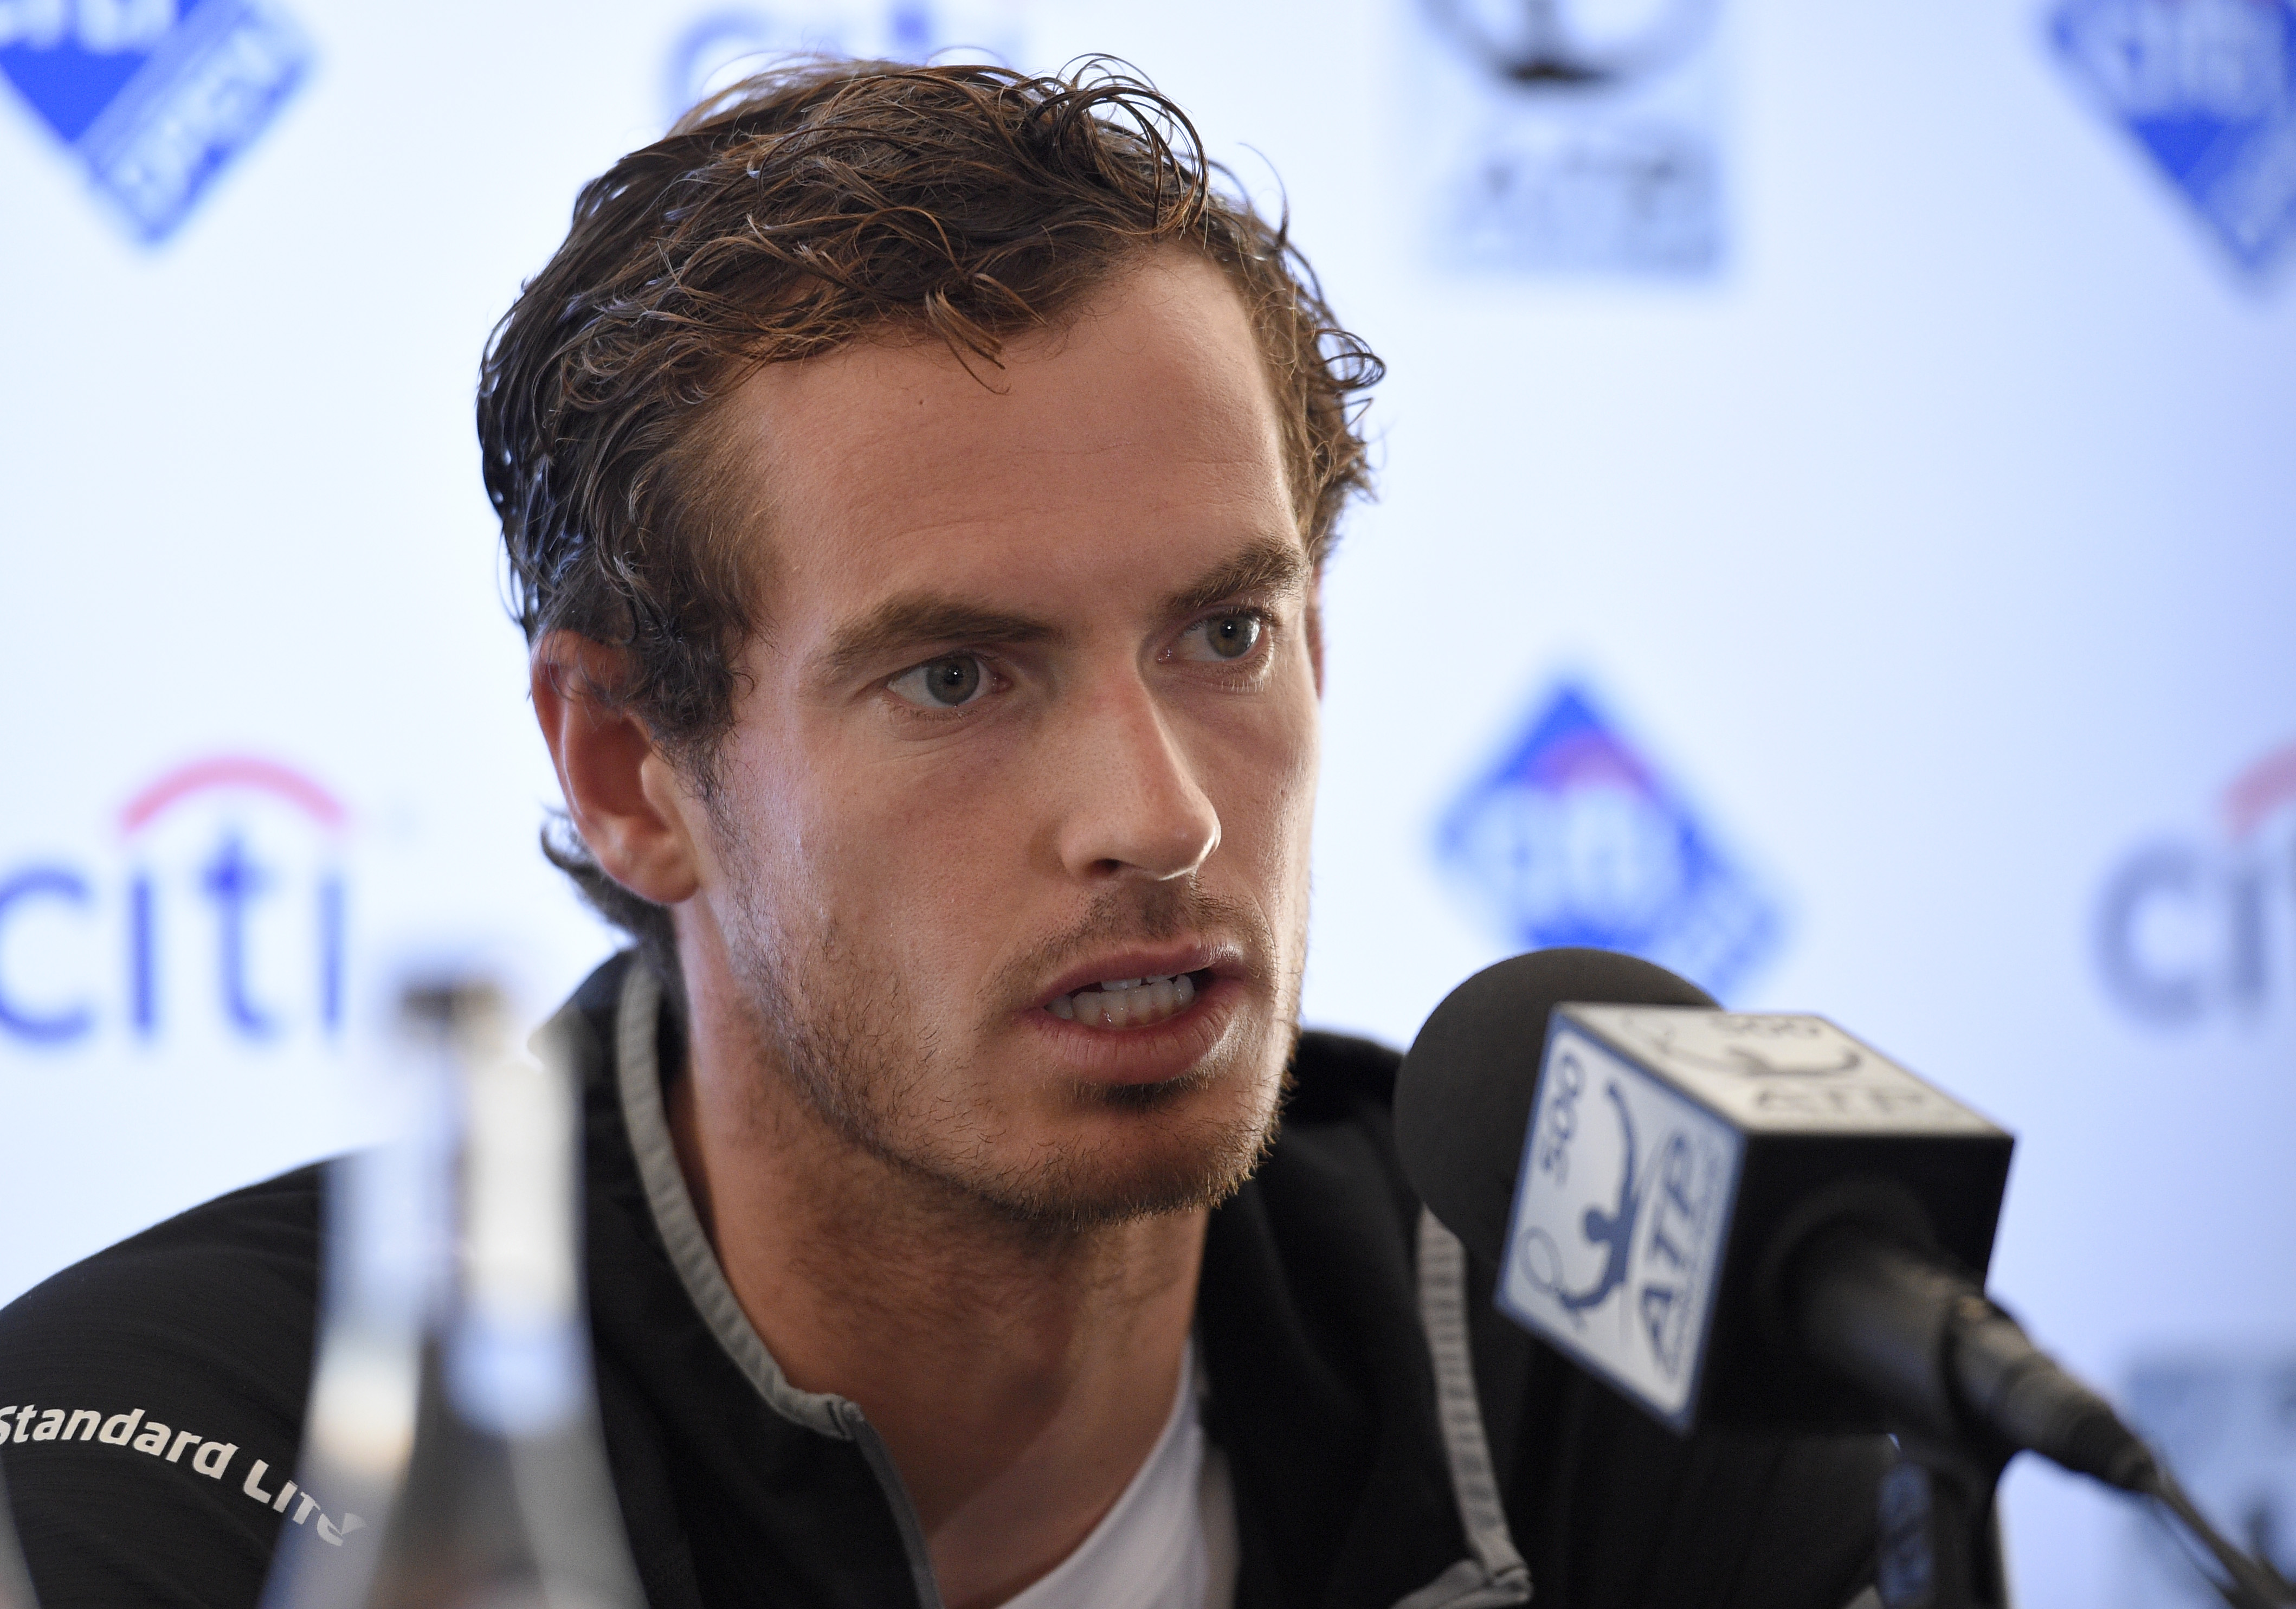 Andy Murray, of Britain, speaks at a press conference at the Citi Open tennis tournament, Monday, Aug. 3, 2015, in Washington. Photo: AP